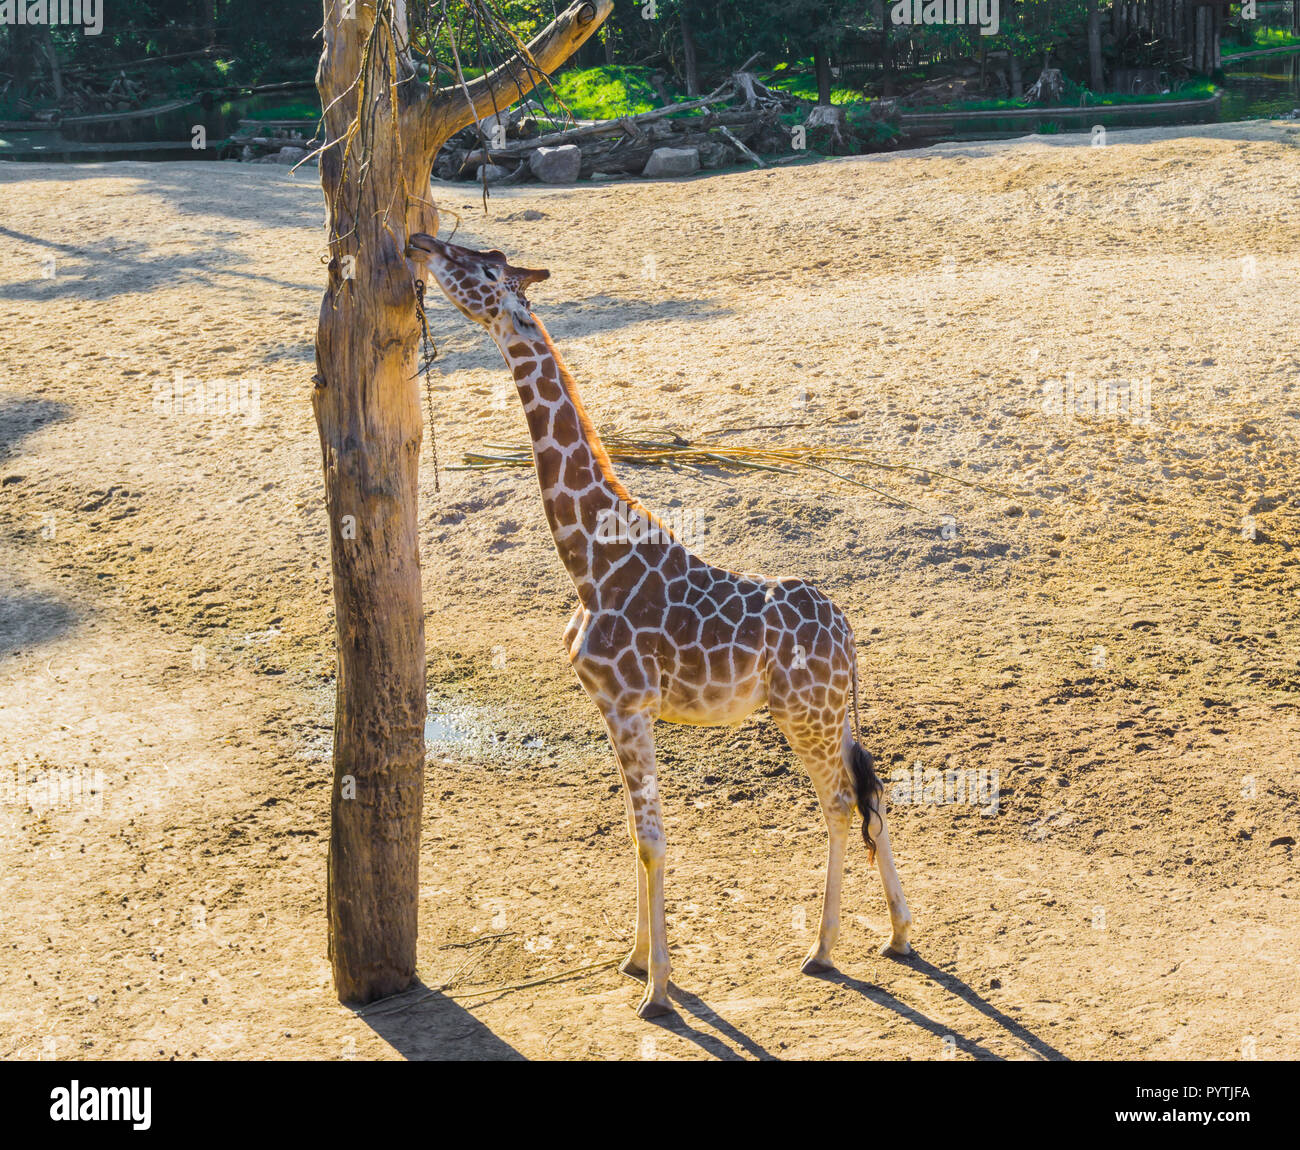 savanna animal portrait of a giraffe reaching and eating from a branch in a tree Stock Photo